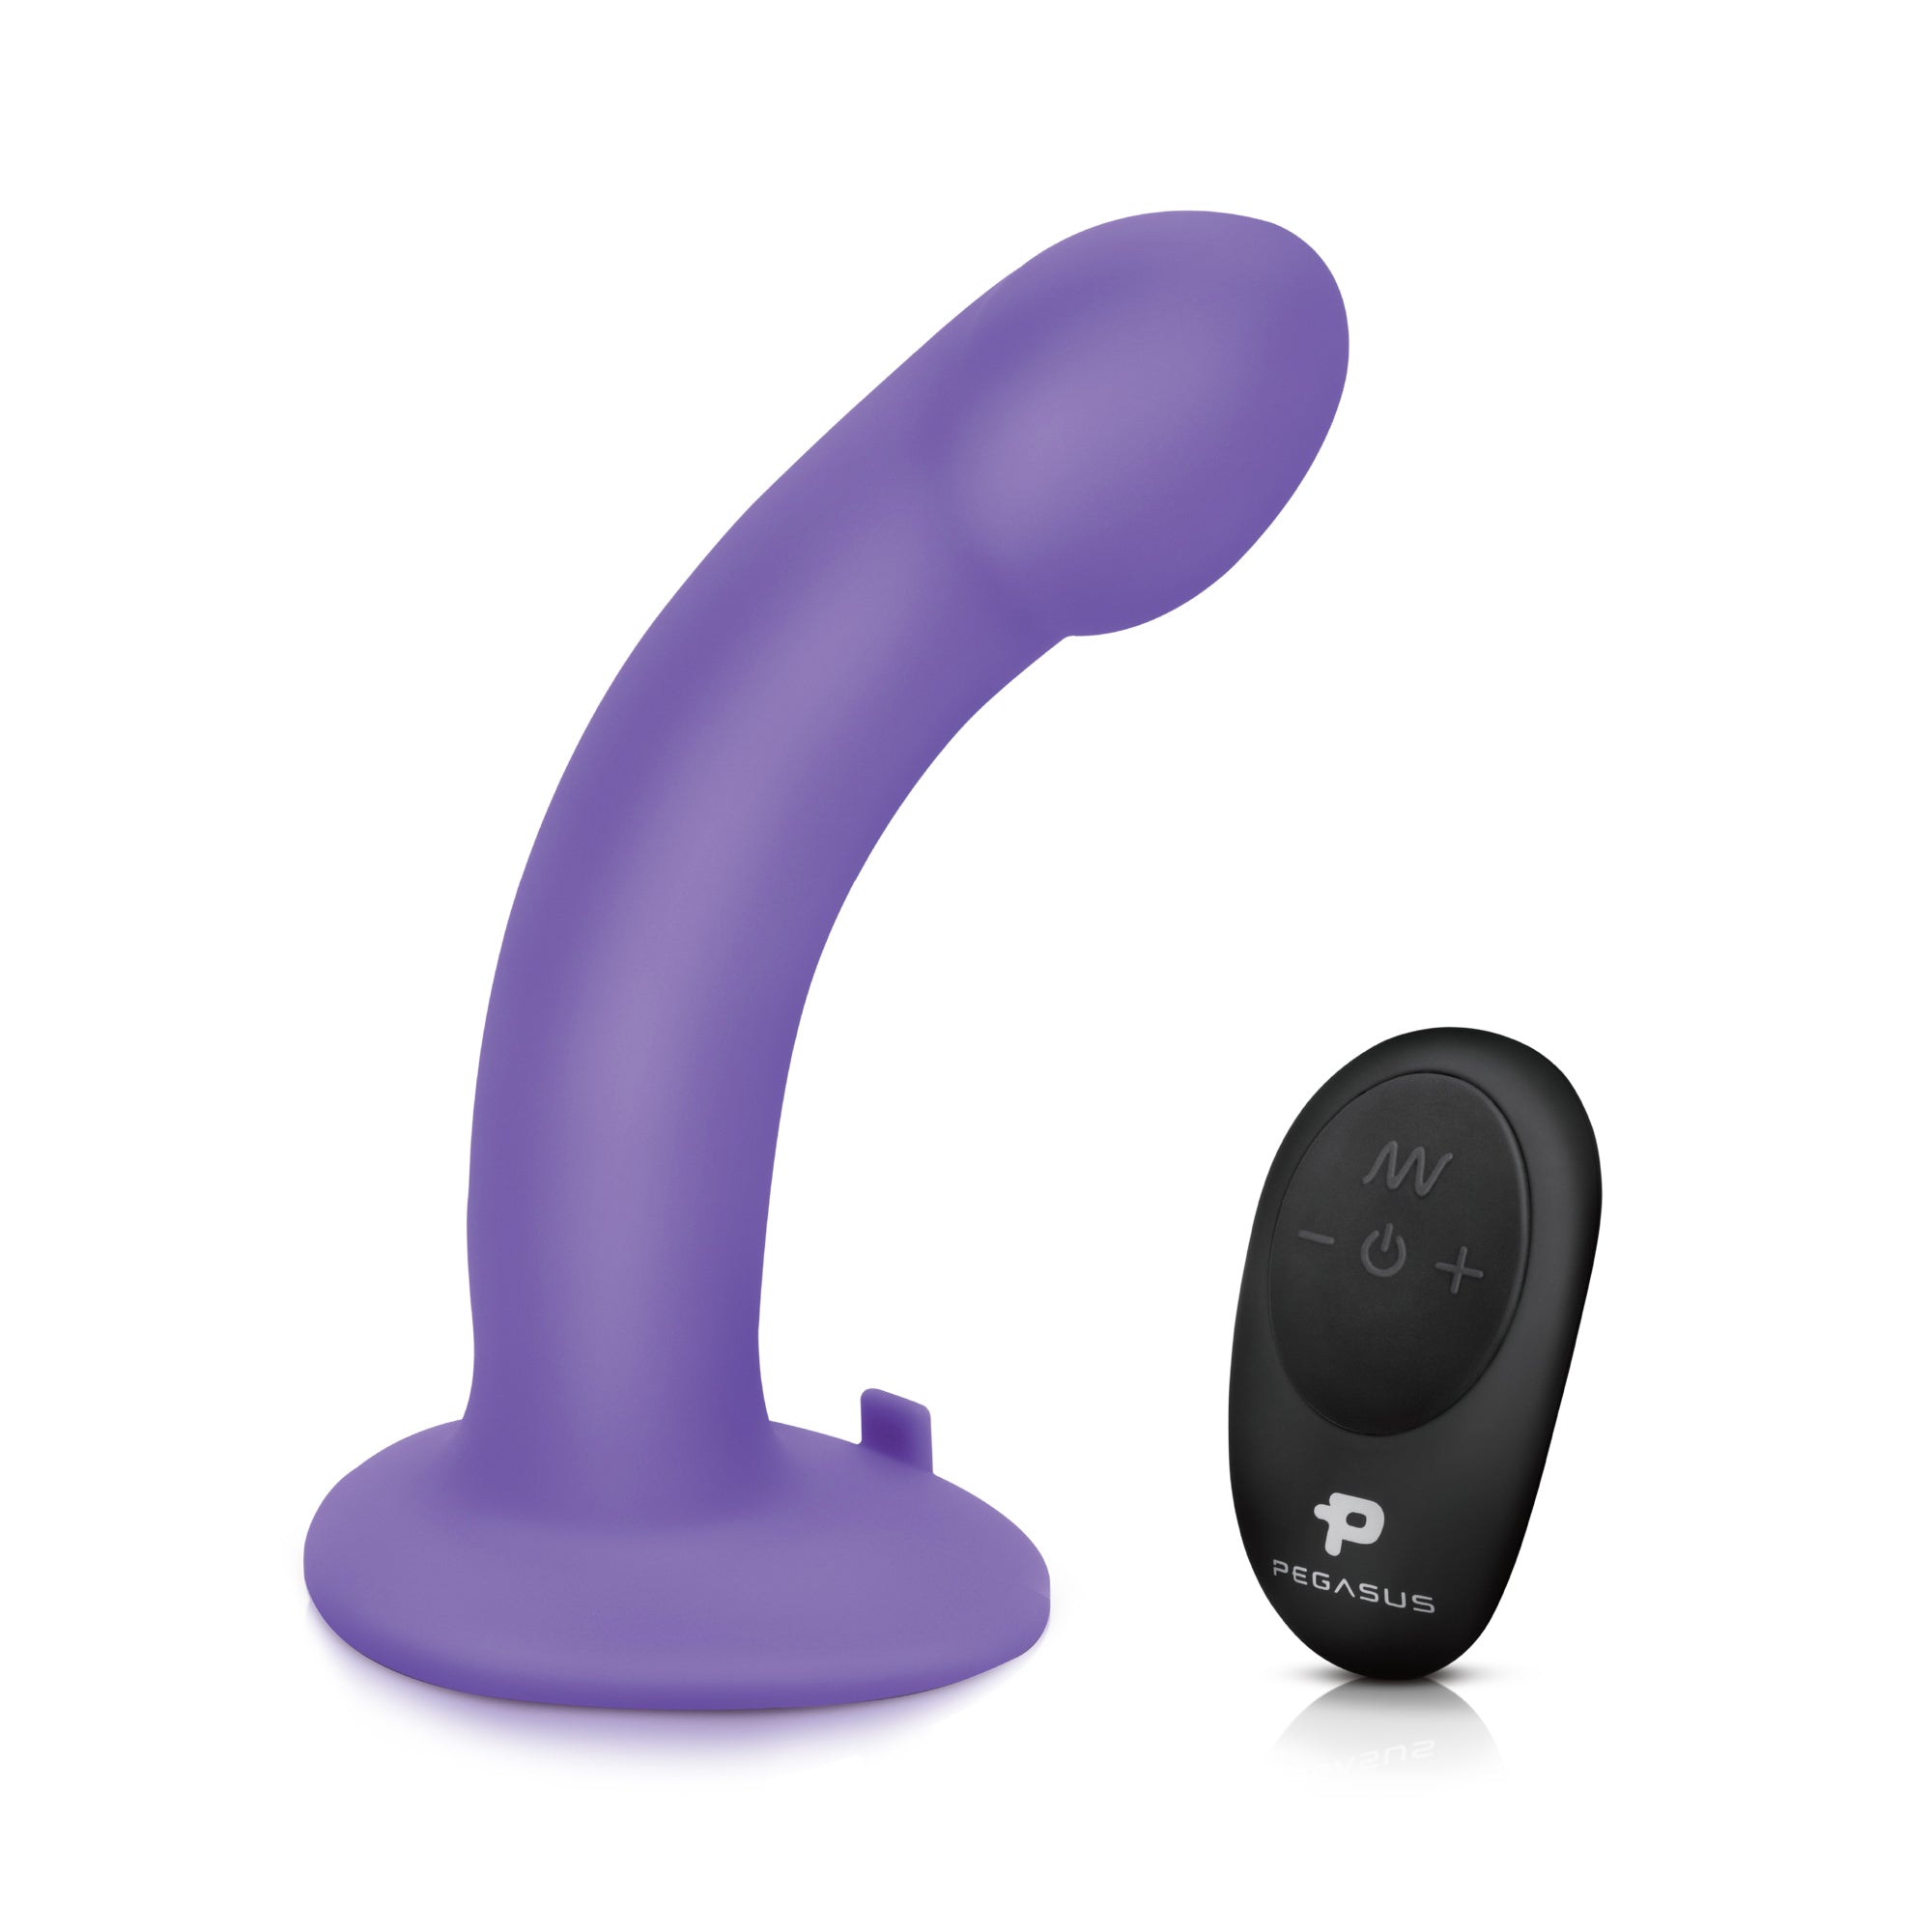 6" Curved Realistic Silicone Peg With Harness Included